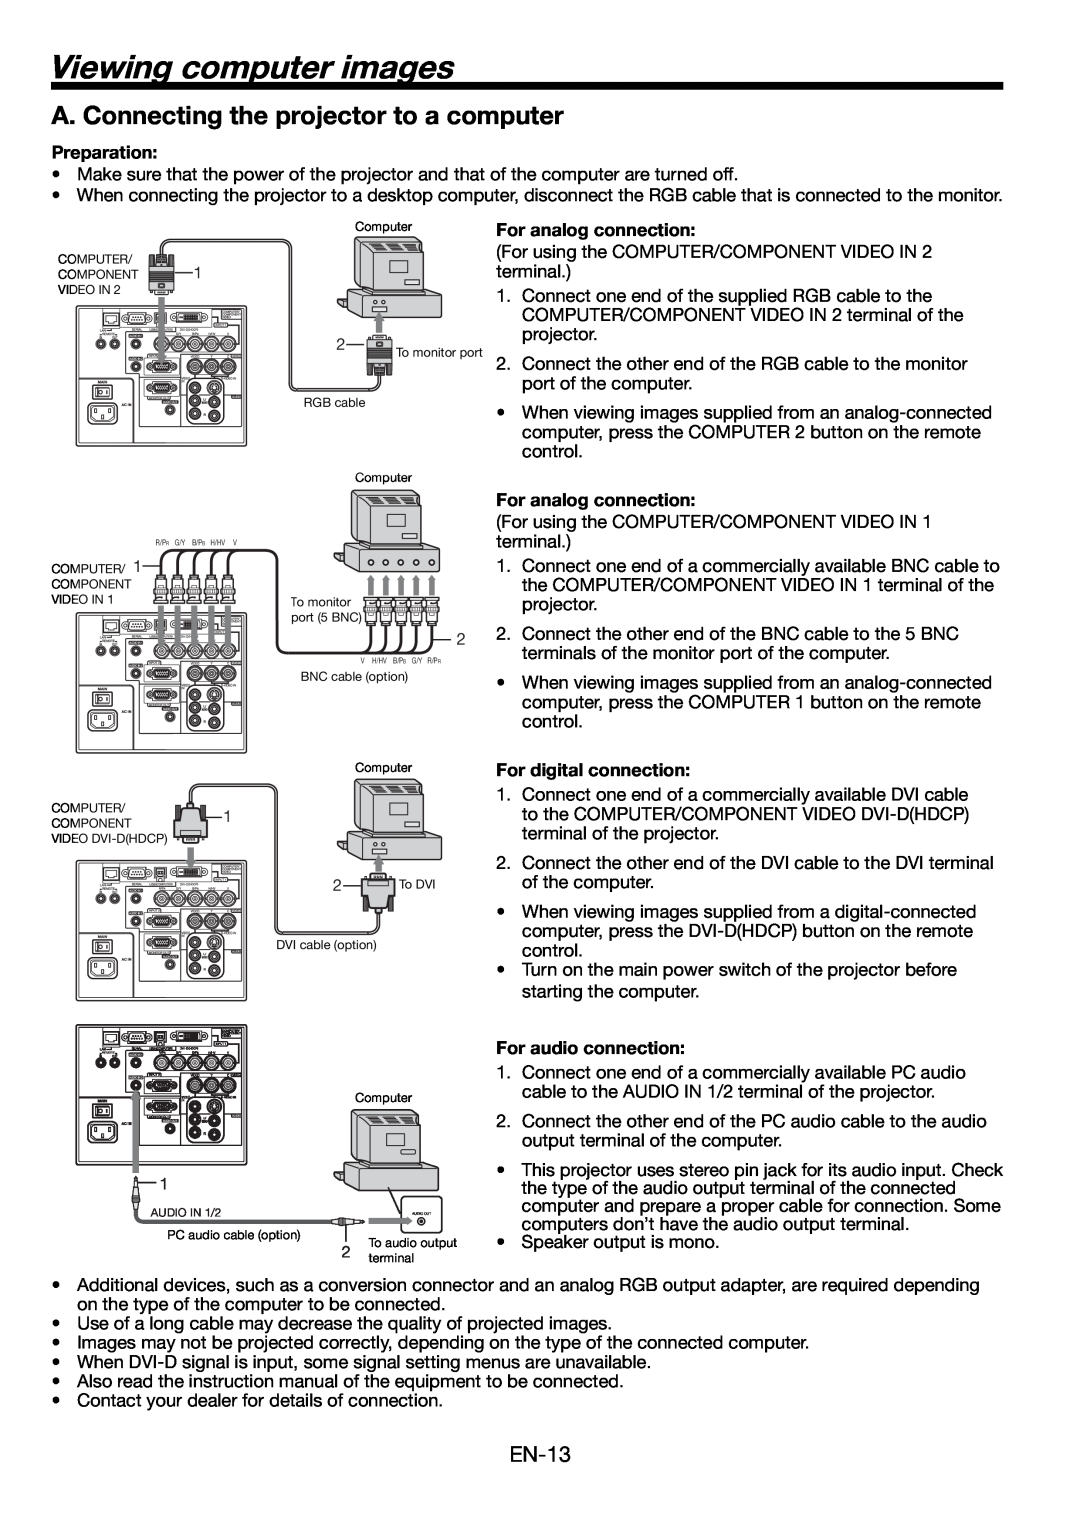 Mitsumi electronic HD8000 user manual Viewing computer images, A. Connecting the projector to a computer, Preparation 